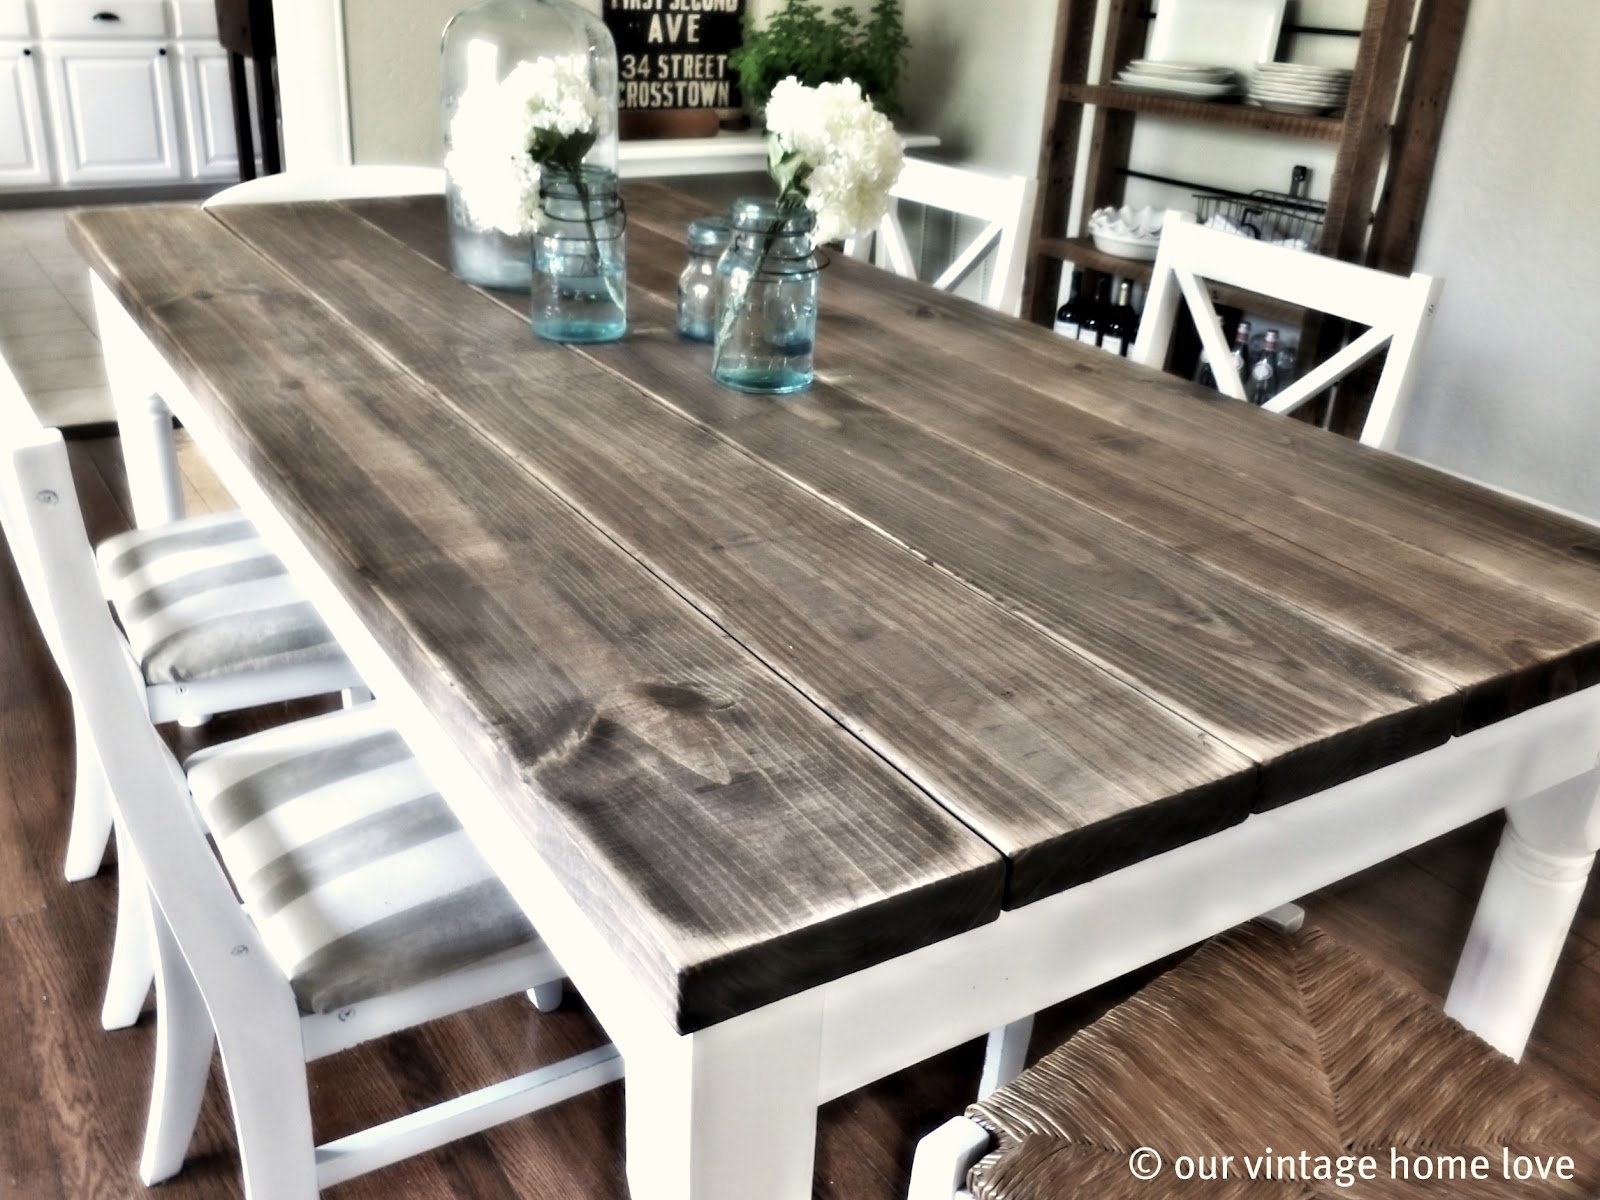 Our Vintage Home Love Dining Room Table Tutorial